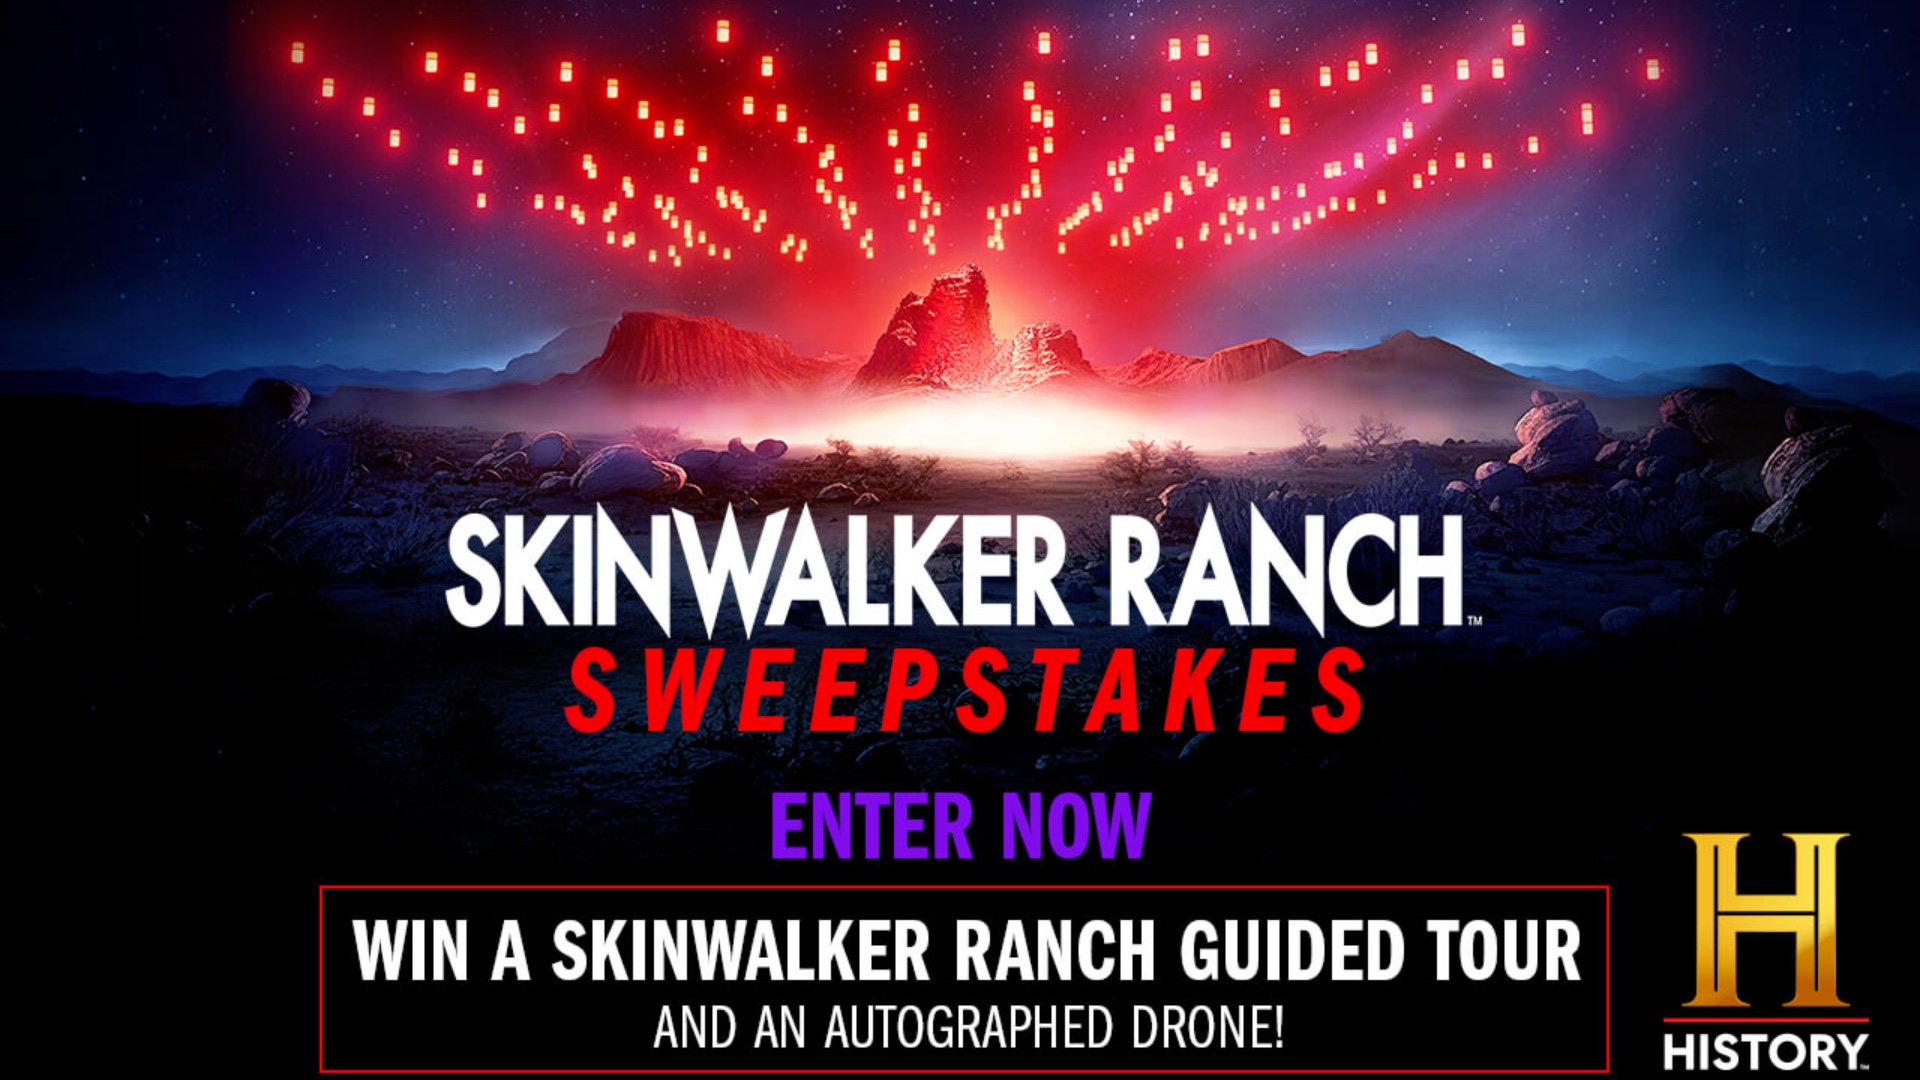 The Skinwalker Ranch Sweepstakes